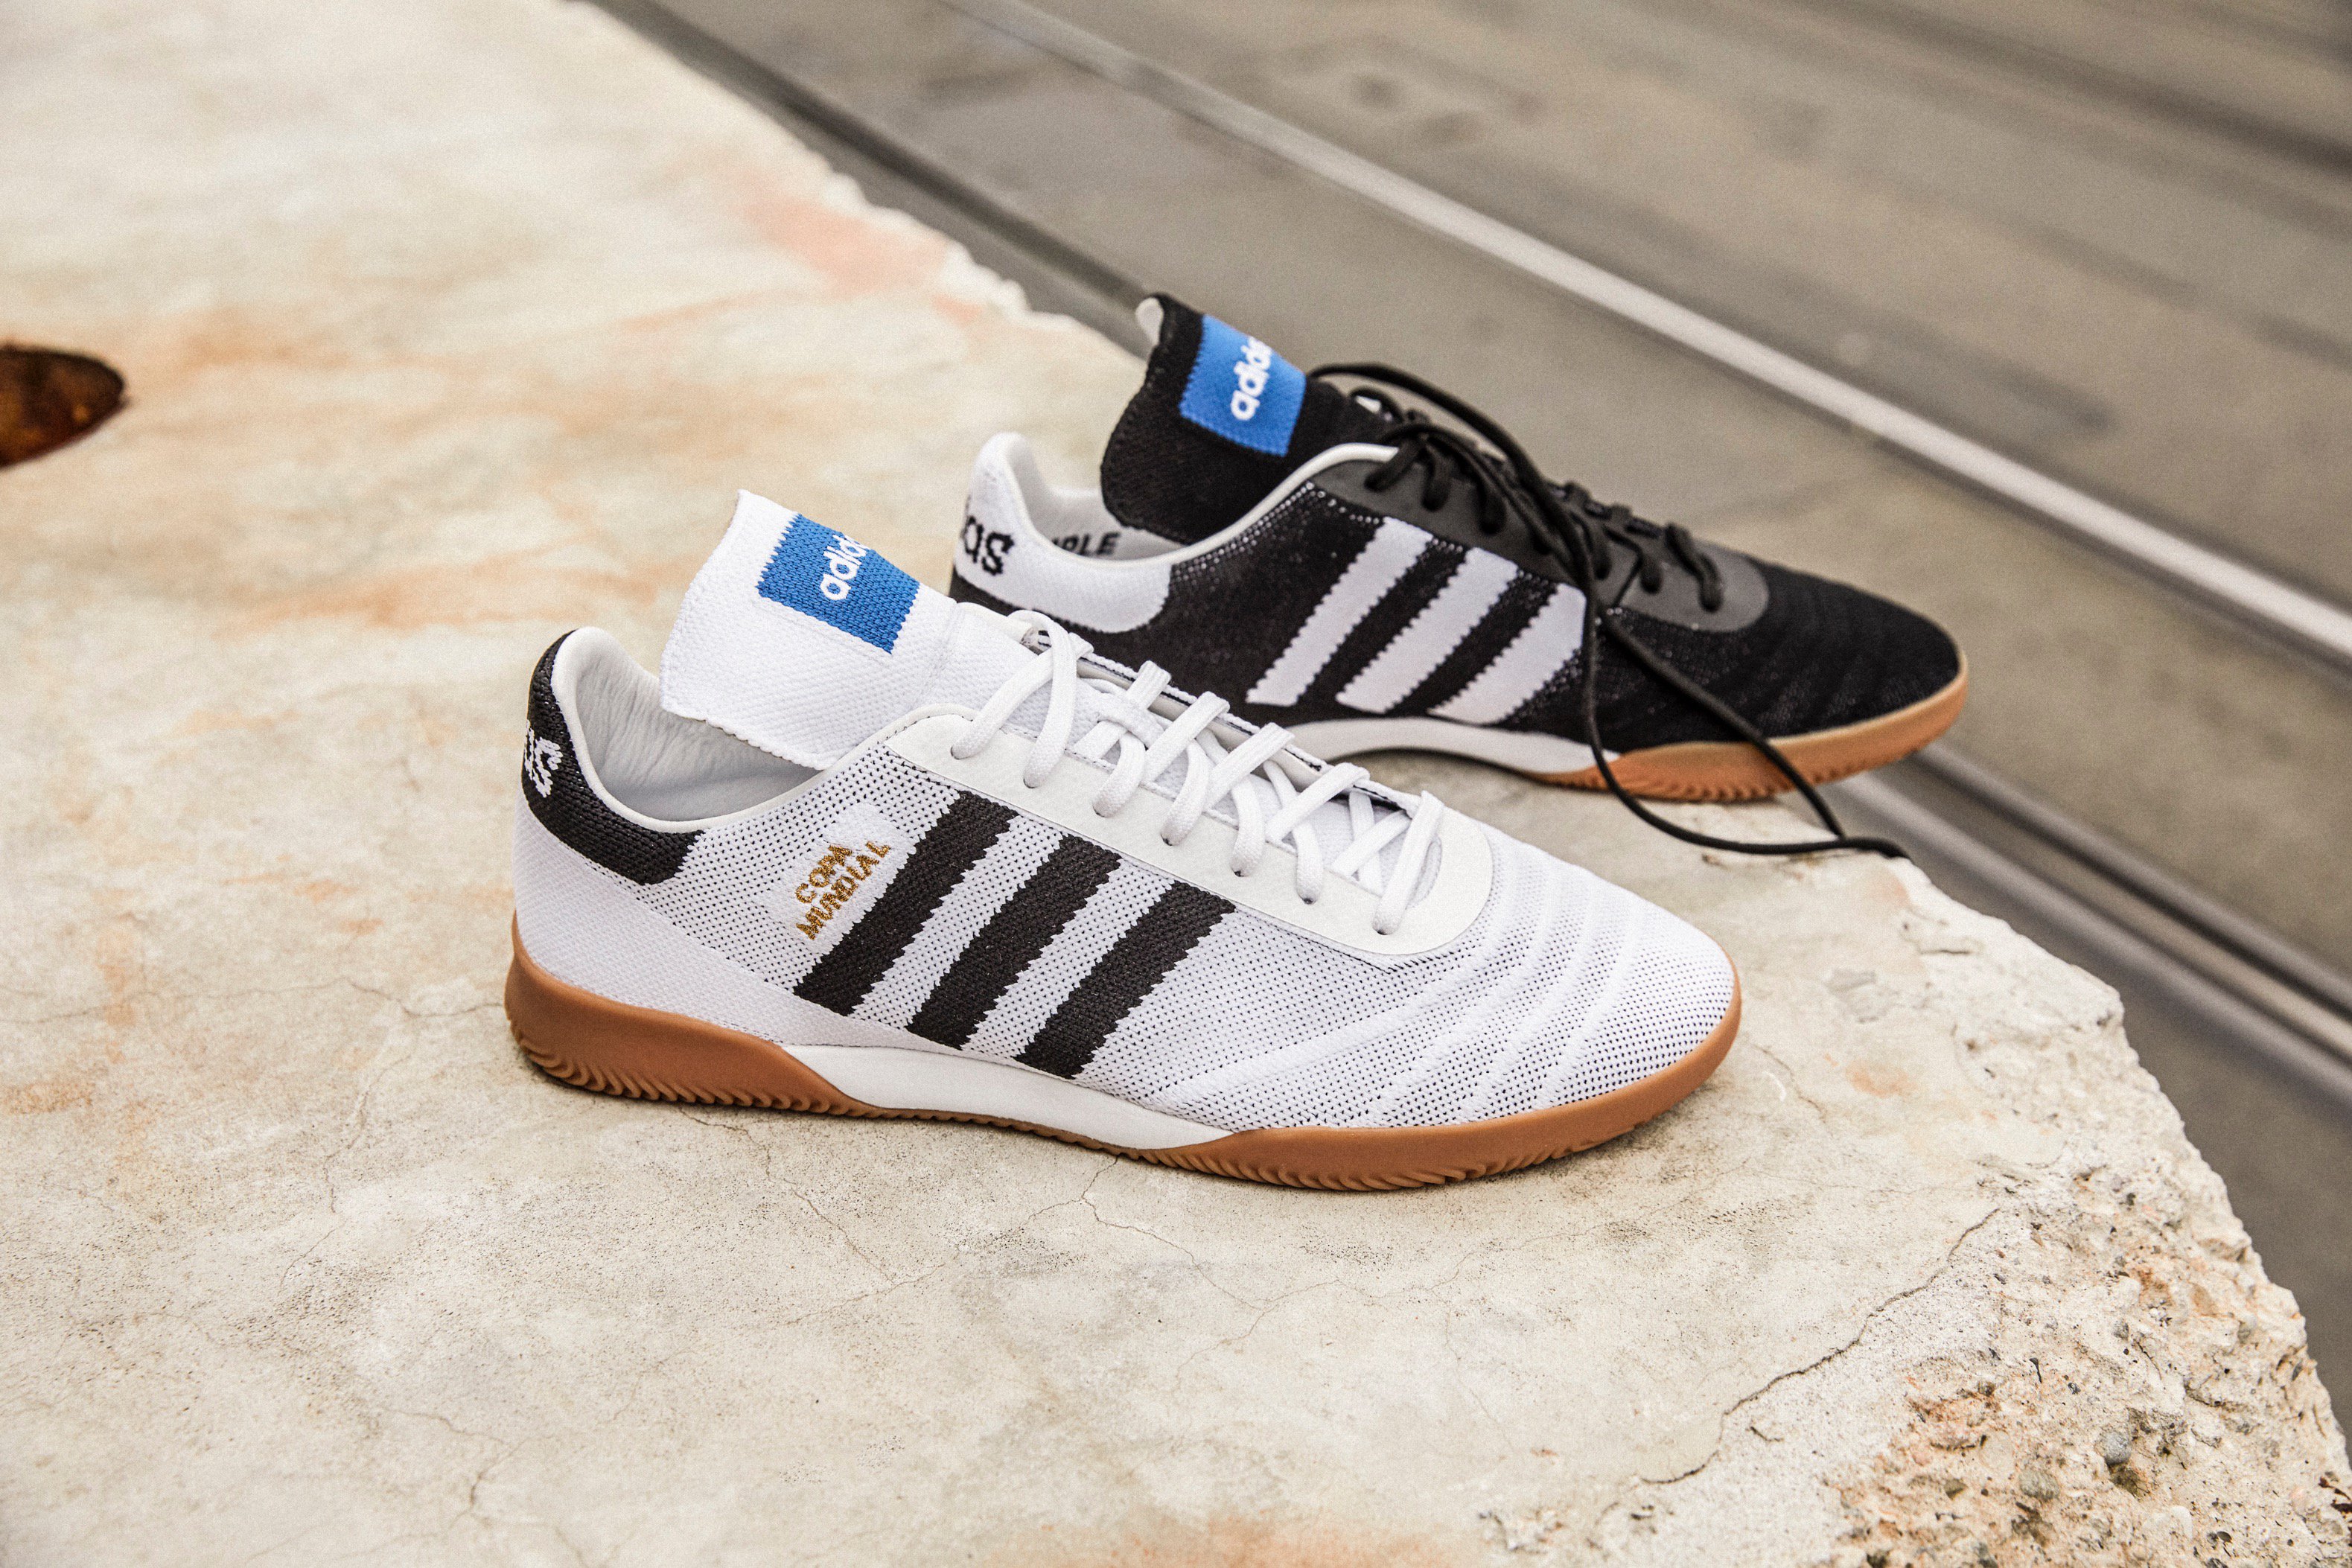 Pro:Direct Soccer on Twitter: "70 years strong. The adidas Copa Mundial hits streets with a Limited Edition '70Y' sneaker. https://t.co/O9RzbeuHAu" / Twitter